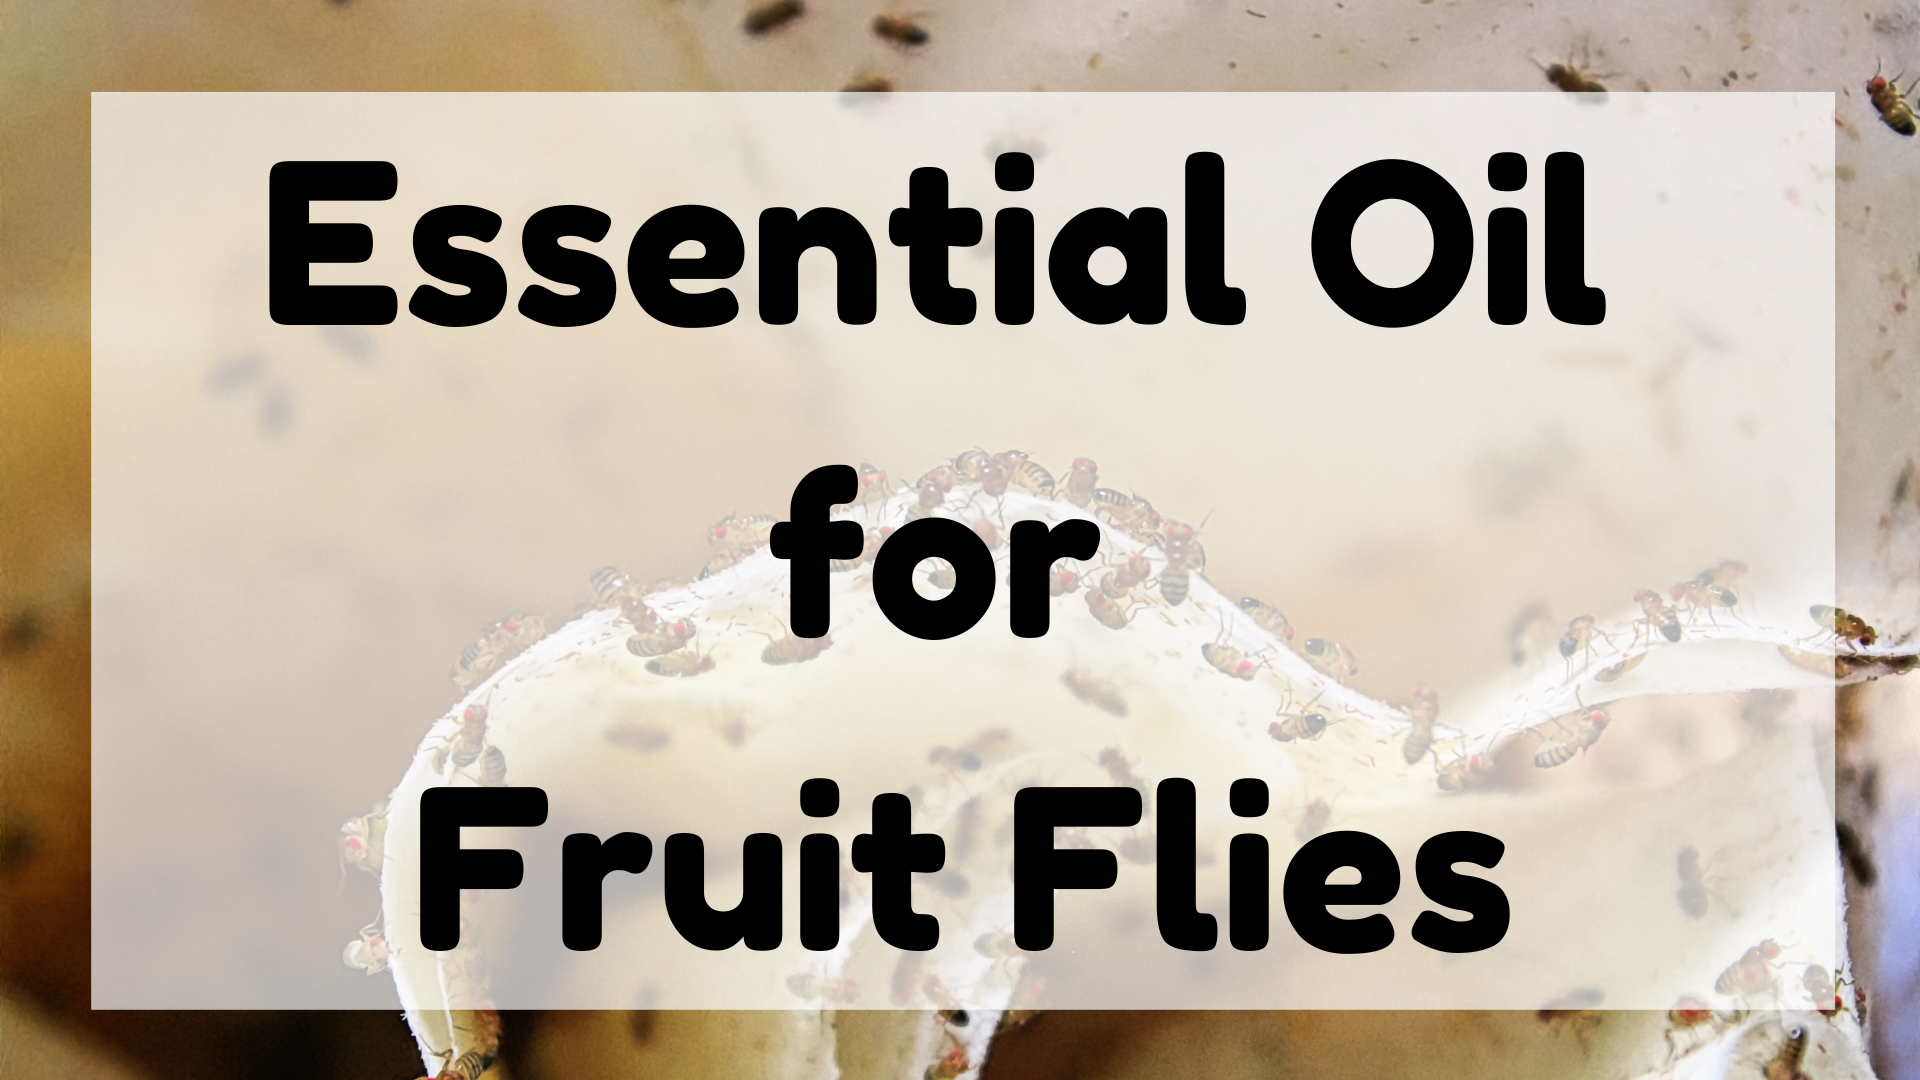 Essential Oil for Fruit Flies featured image